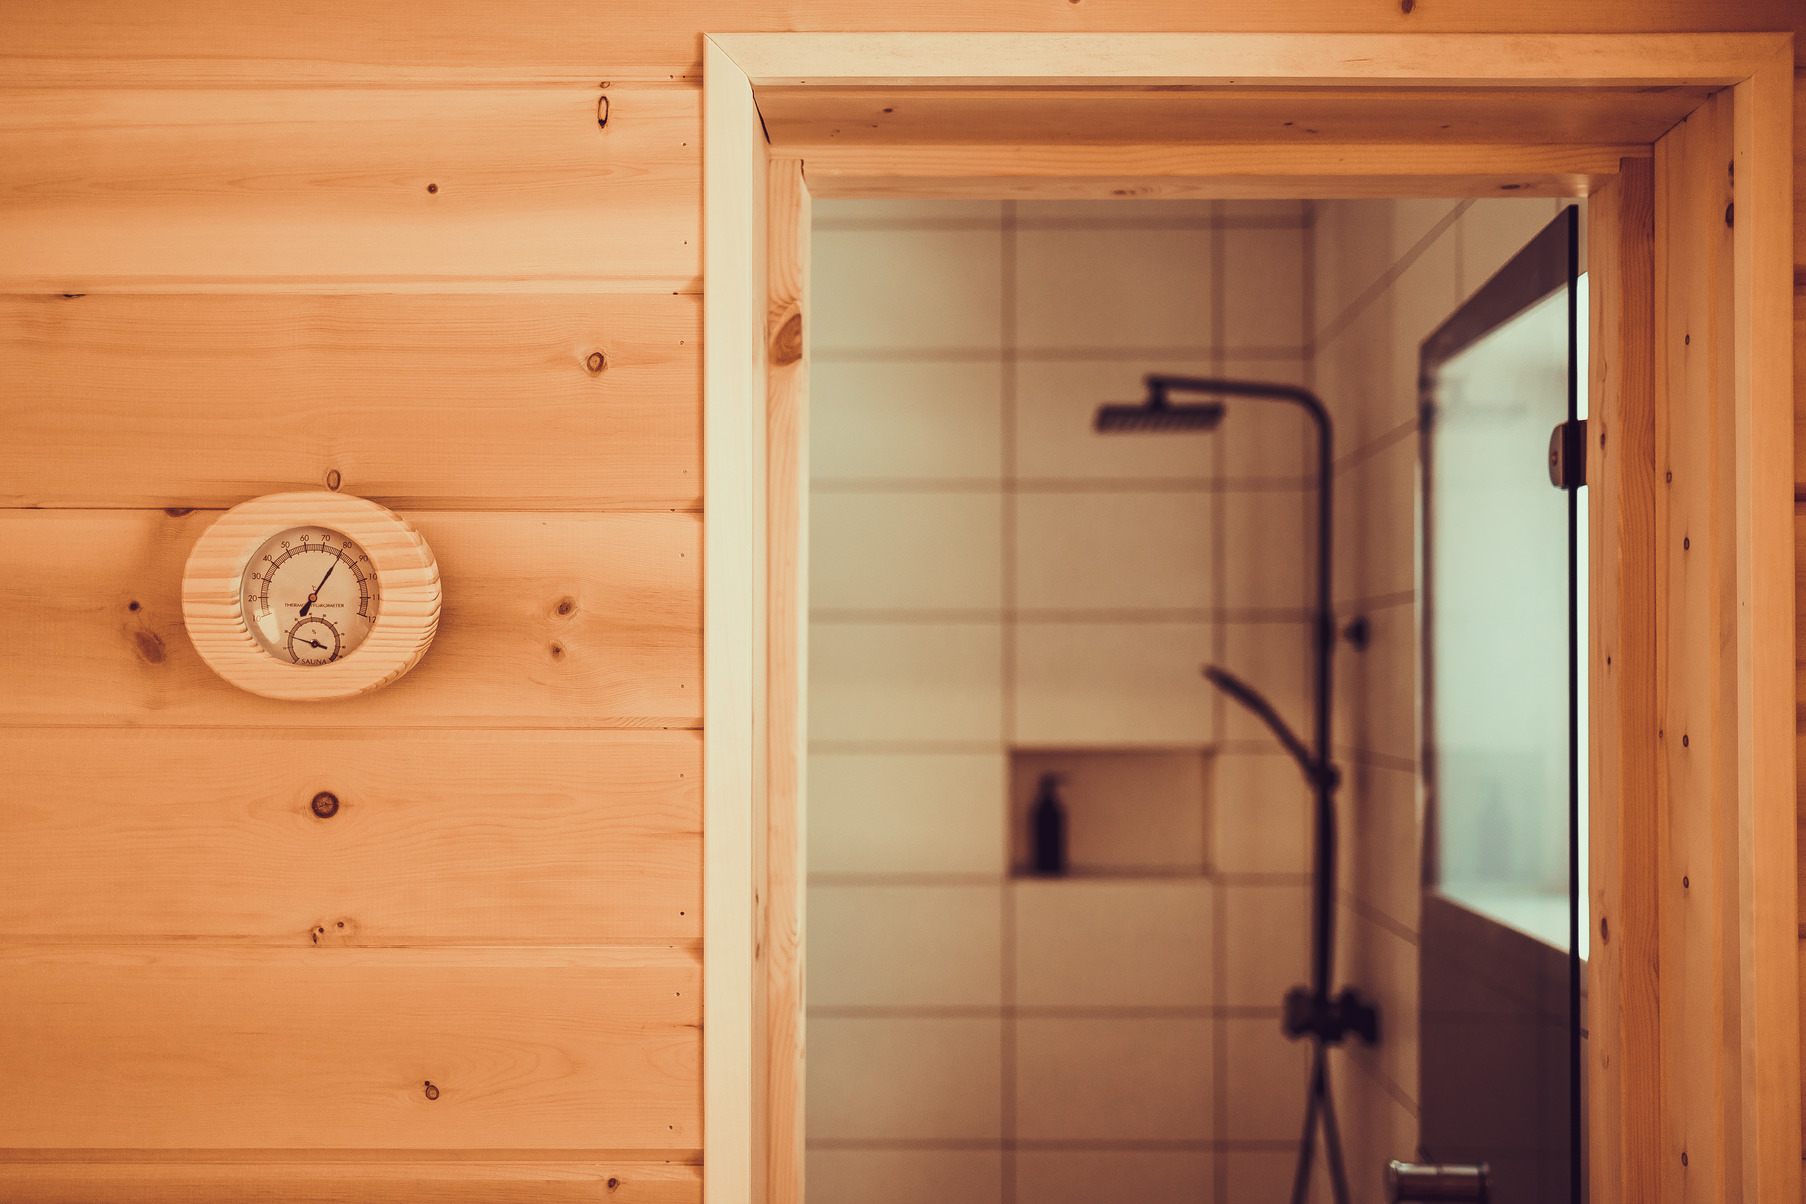 Can an Infrared Sauna Change Your Life?